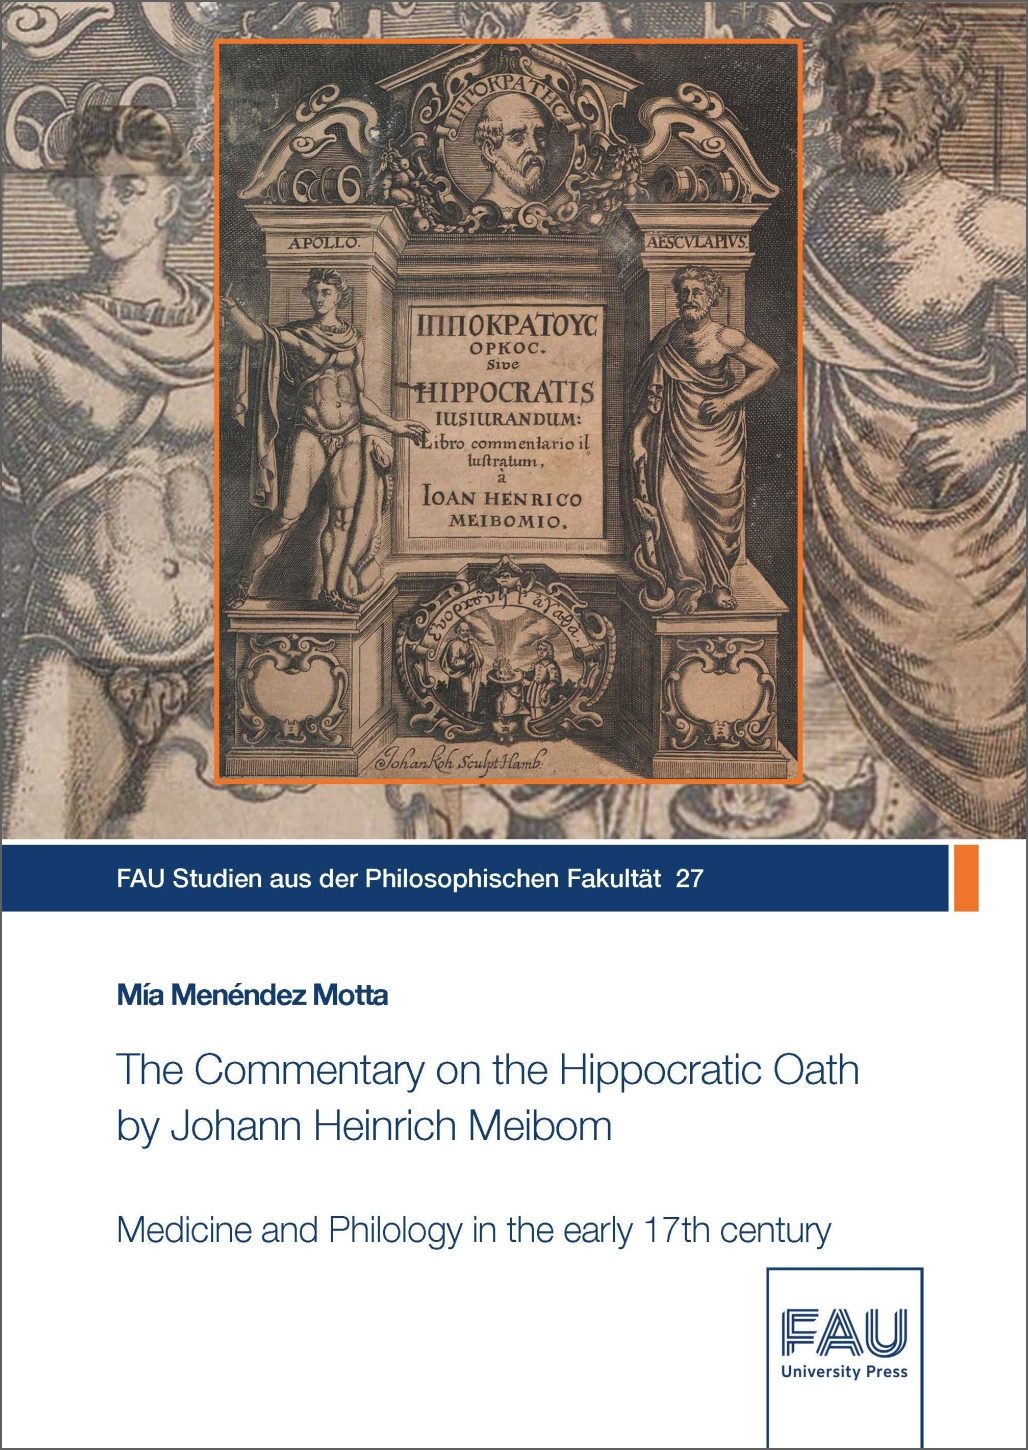 The Commentary on the Hippocratic Oath by Johann Heinrich Meibom